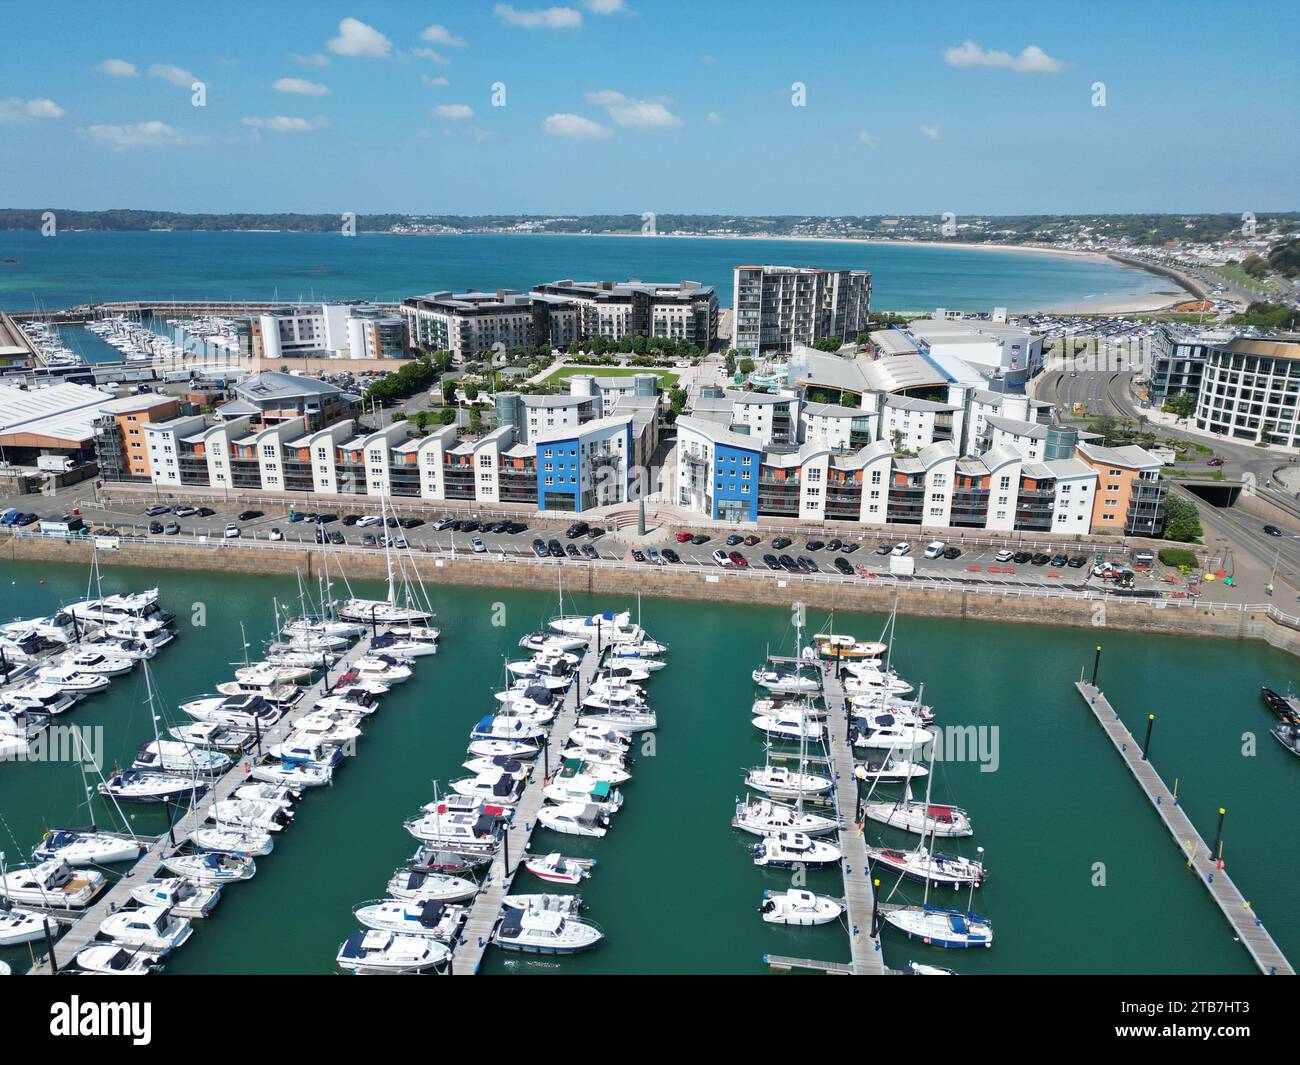 St Helier Harbour, Jersey Channel Islands, aereo con droni Foto Stock